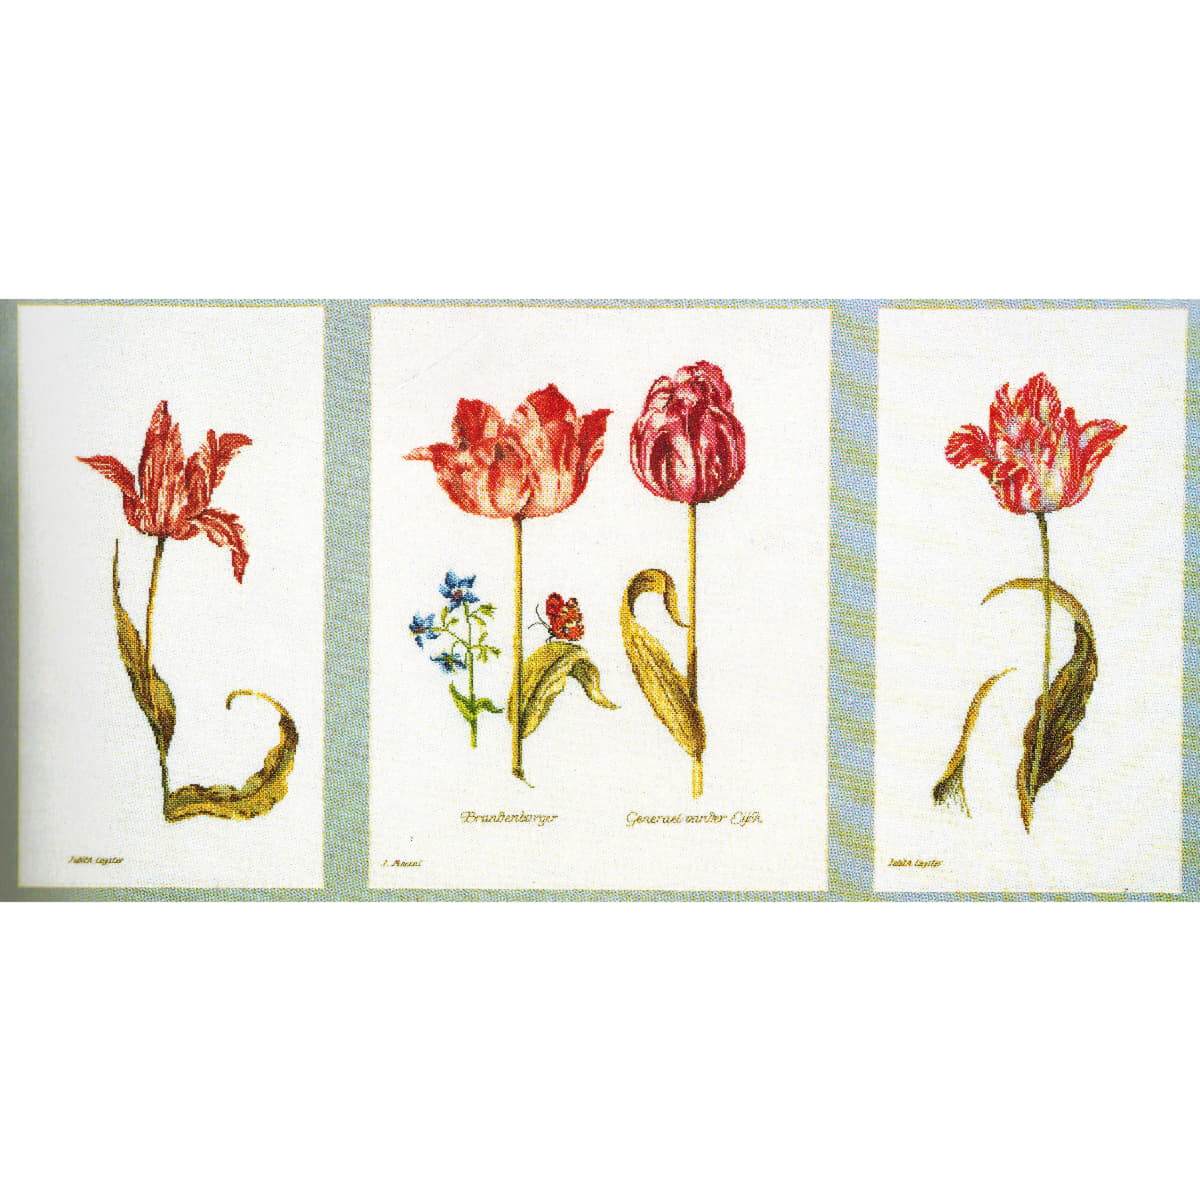 The image you described shows a botanical illustration in...